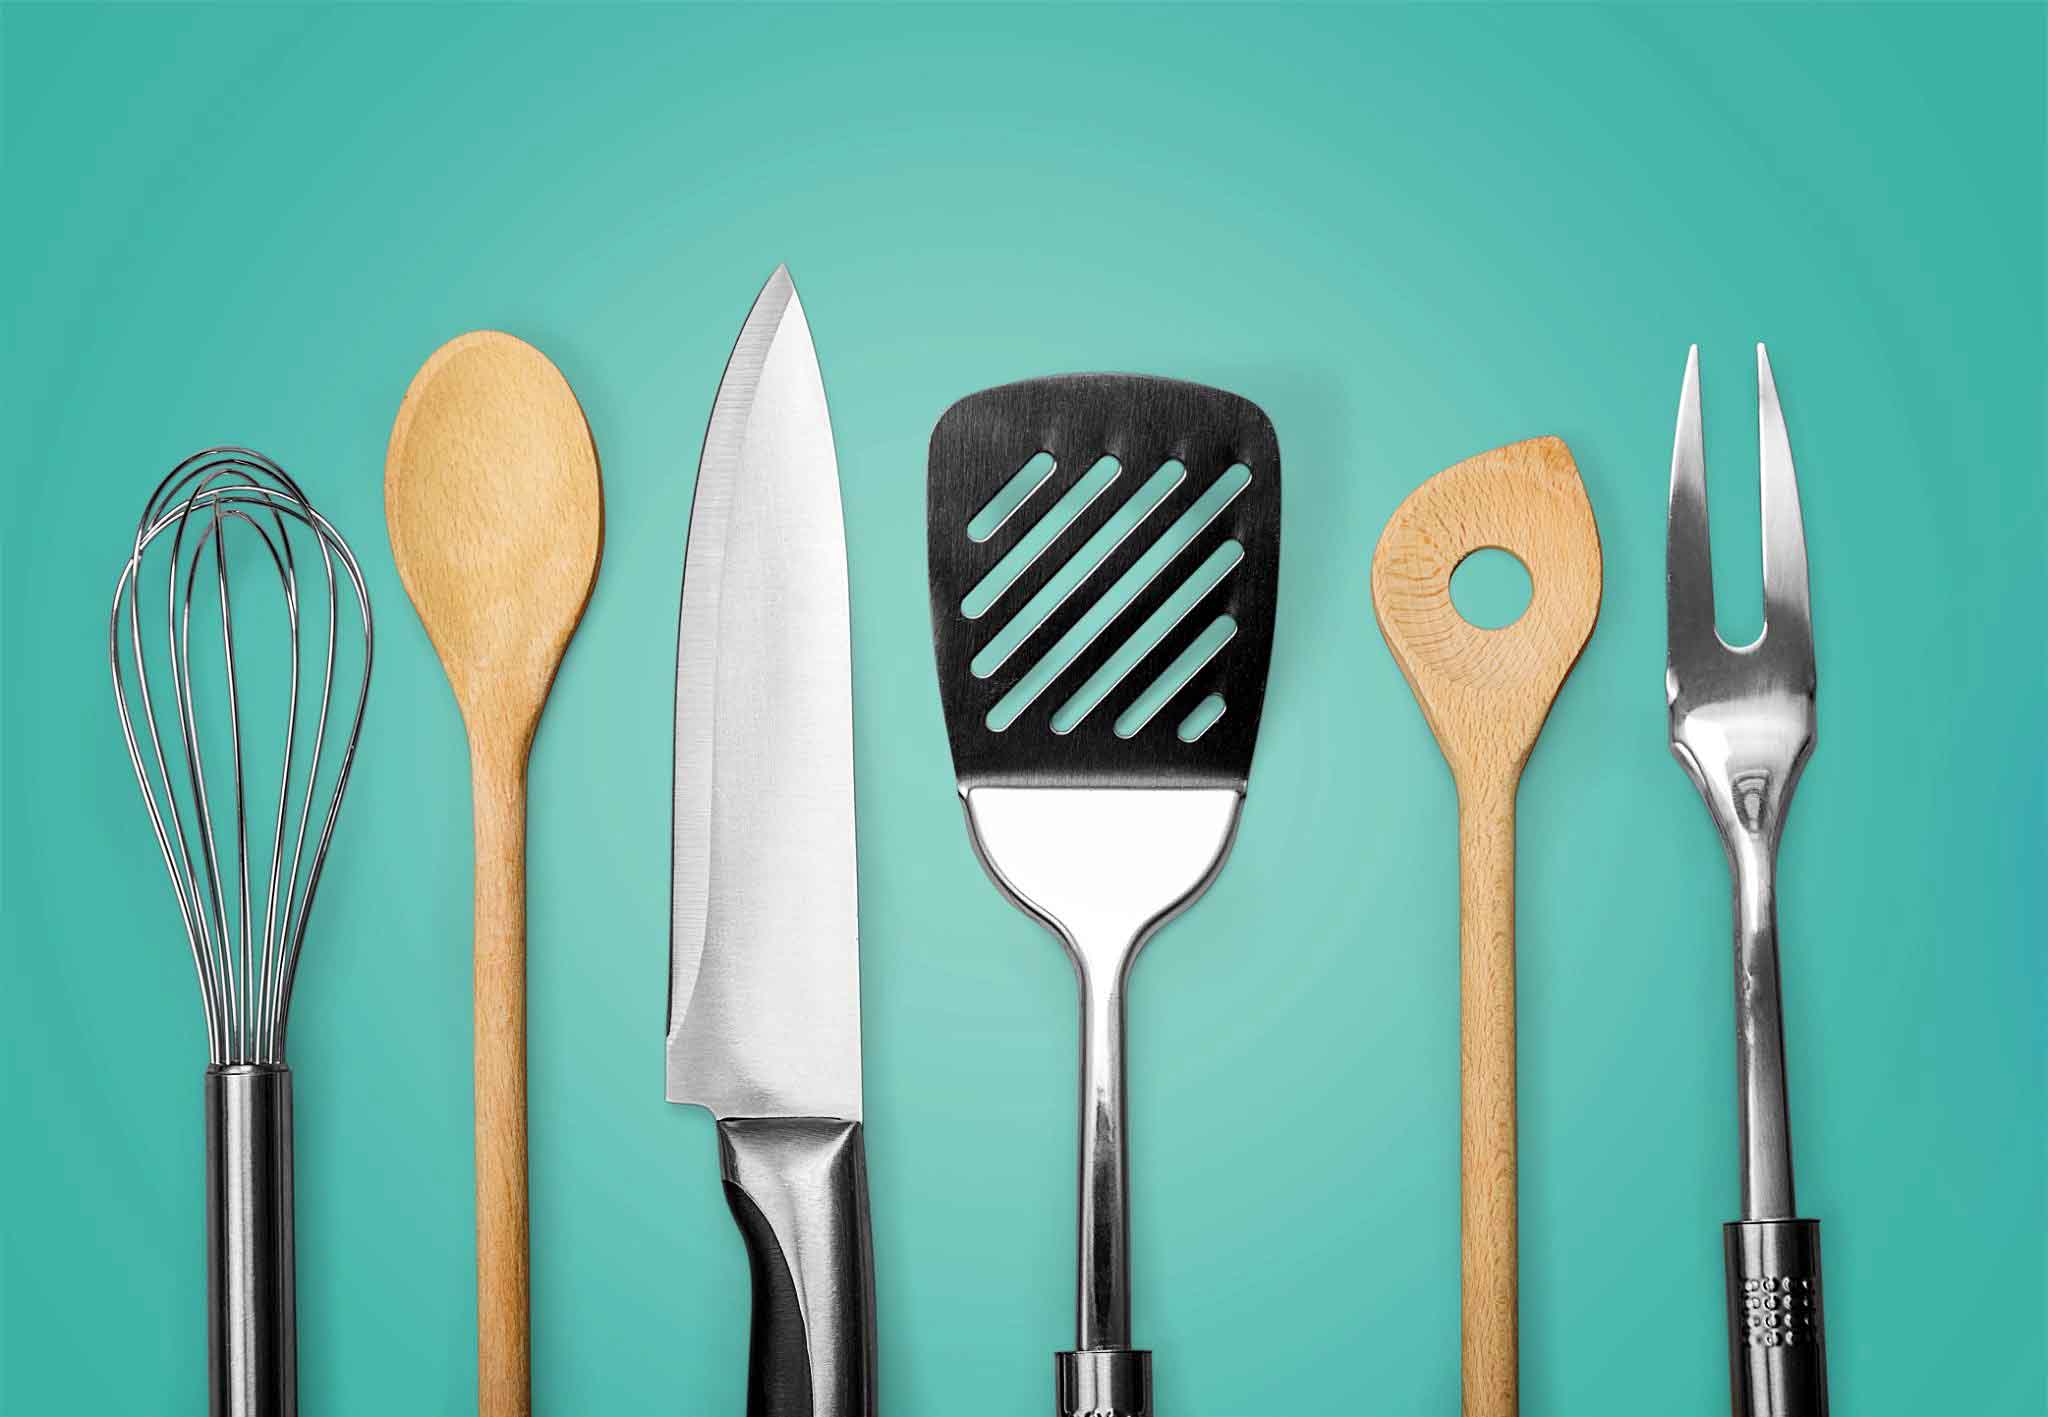 Several metal and wooden kitchen utensils which is the best material